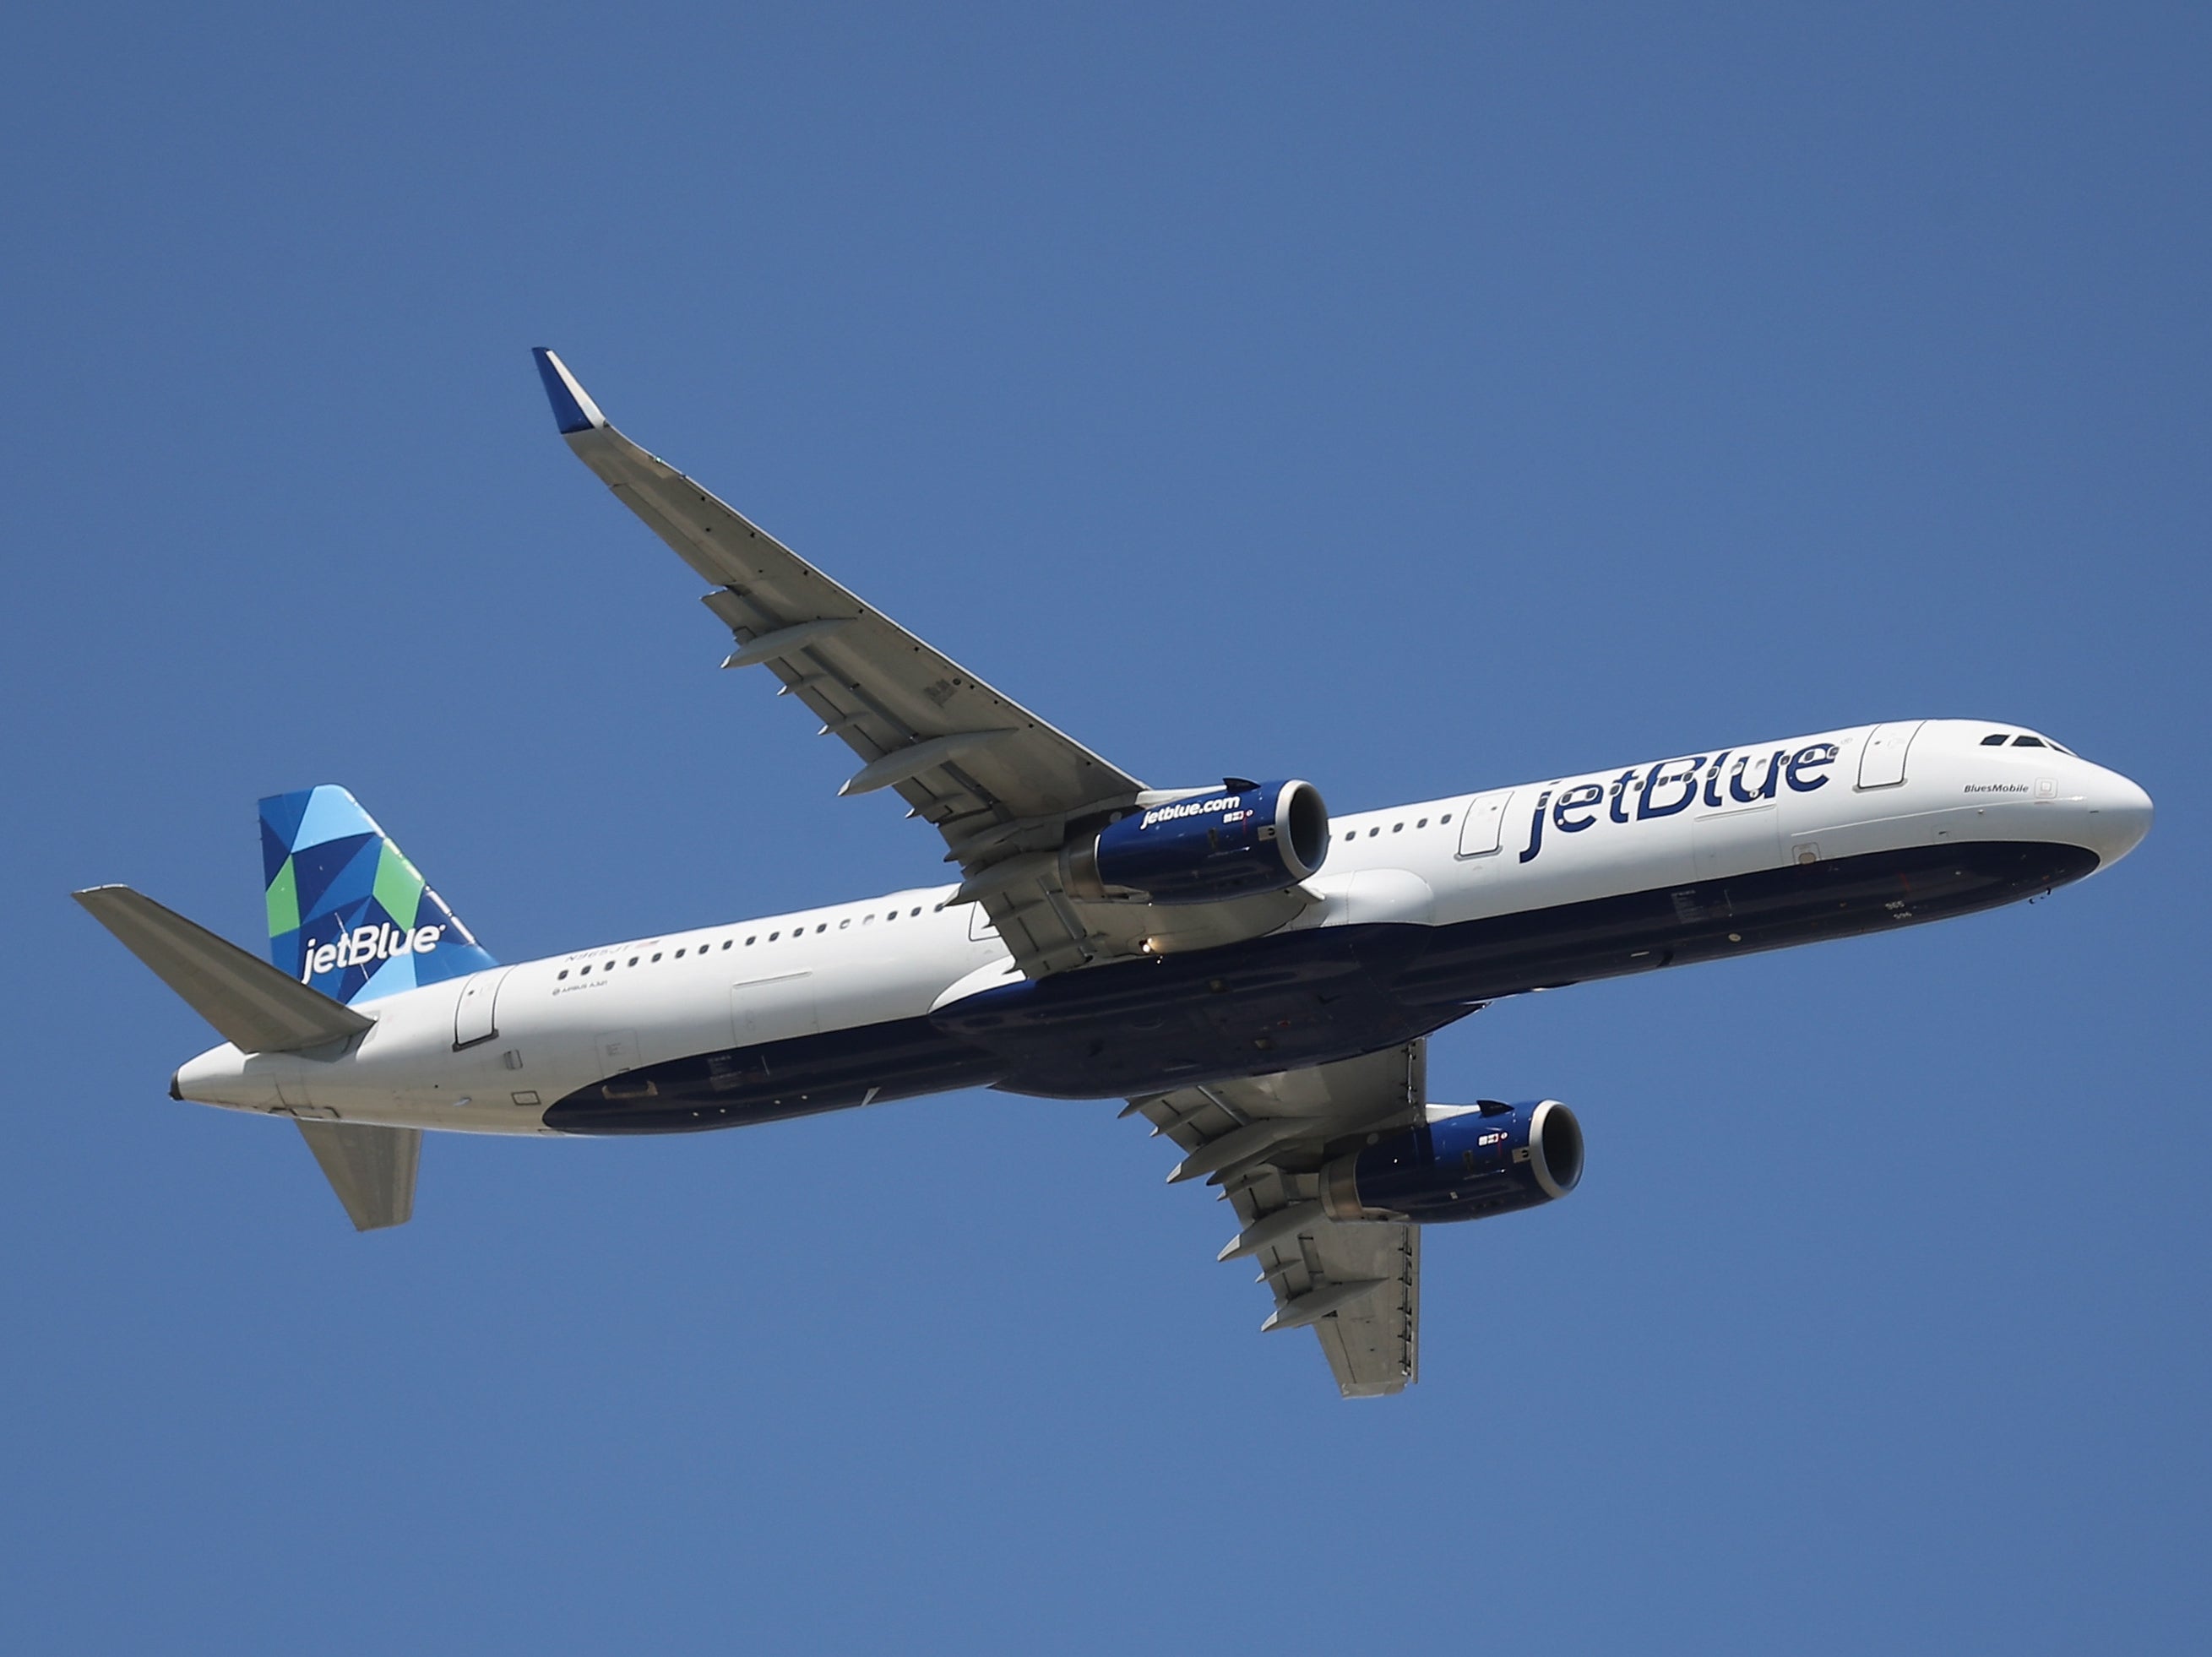 The JetBlue flight was preparing to take off down the runway when it almost crossed path with another flight